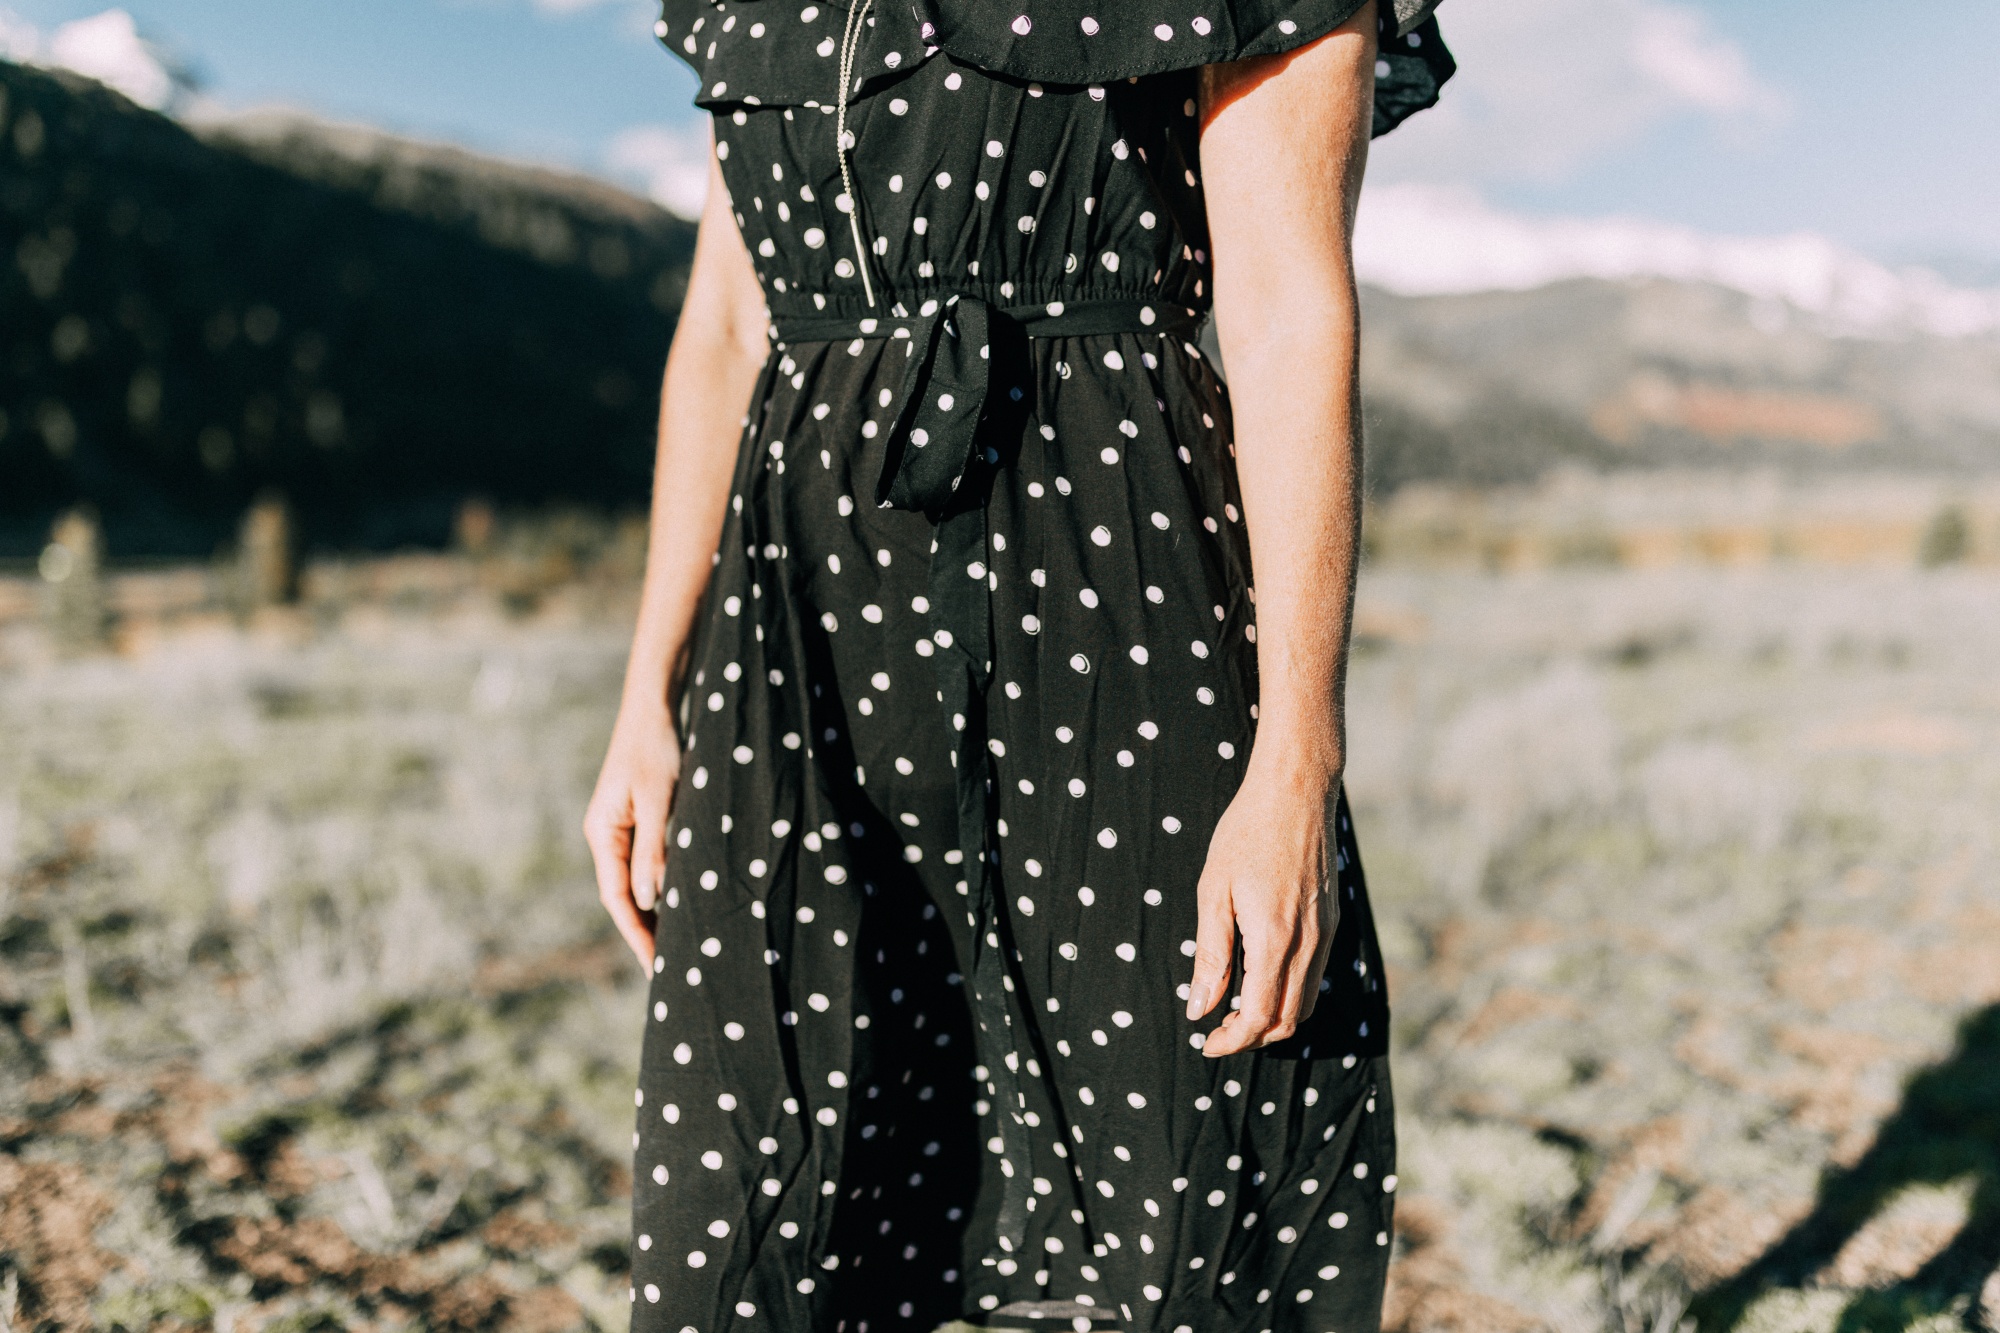 Affordable Summer Dresses, Fashion blogger Erin Busbee of BusbeeStyle.com wearing a black and white polka dot dress by A.N.A. from JCPenney with black Liz Claiborne mules in Telluride, CO